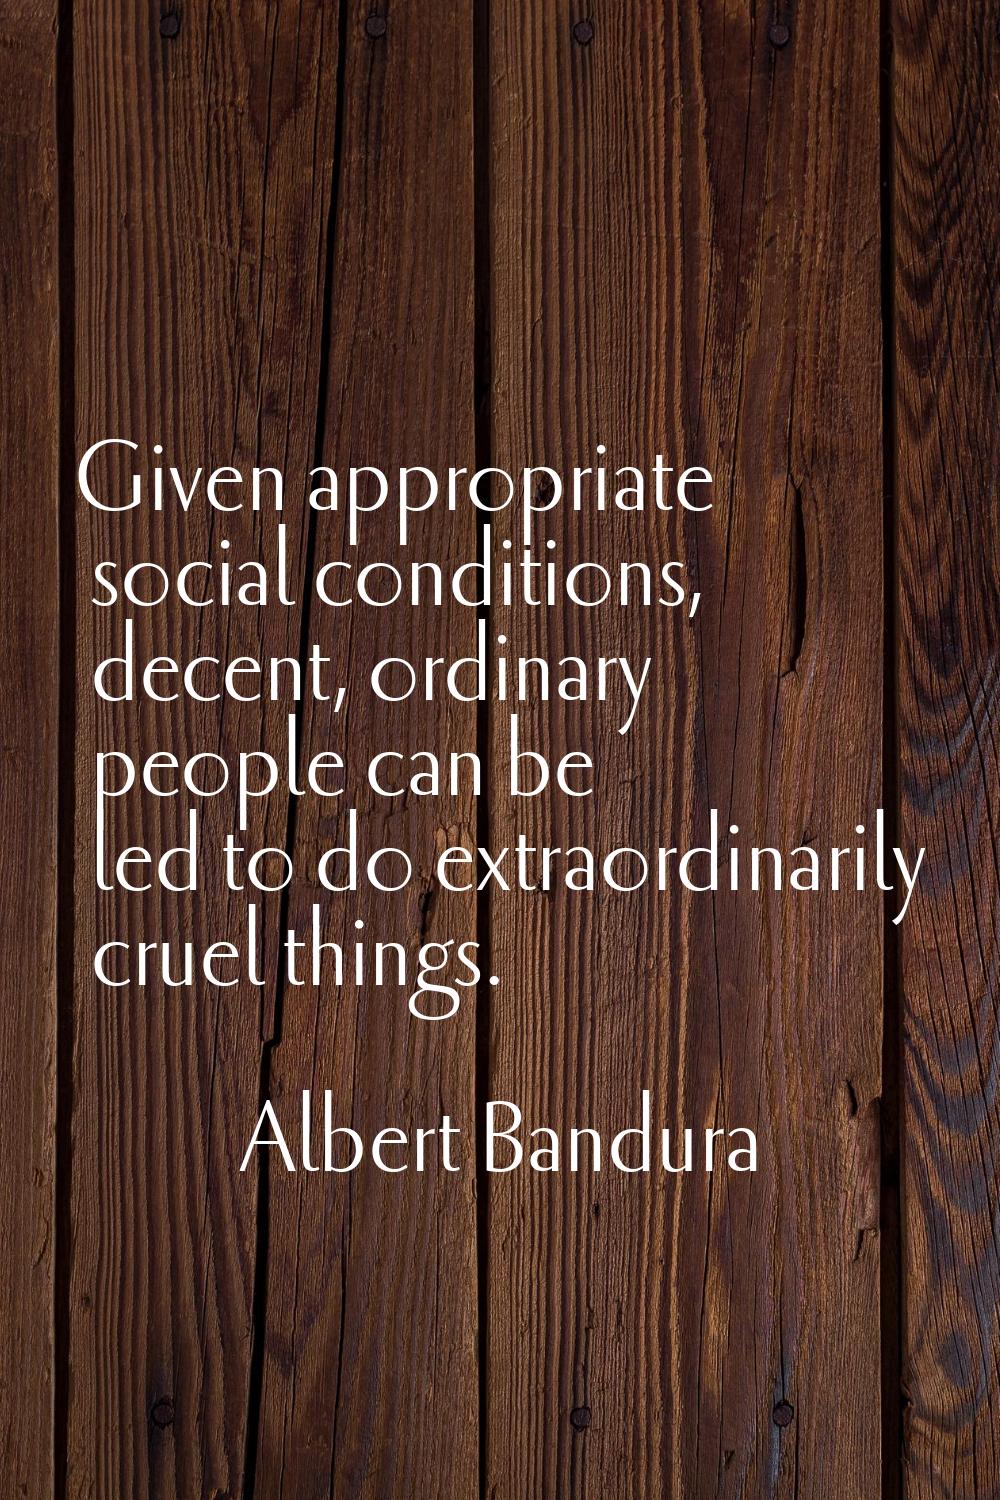 Given appropriate social conditions, decent, ordinary people can be led to do extraordinarily cruel